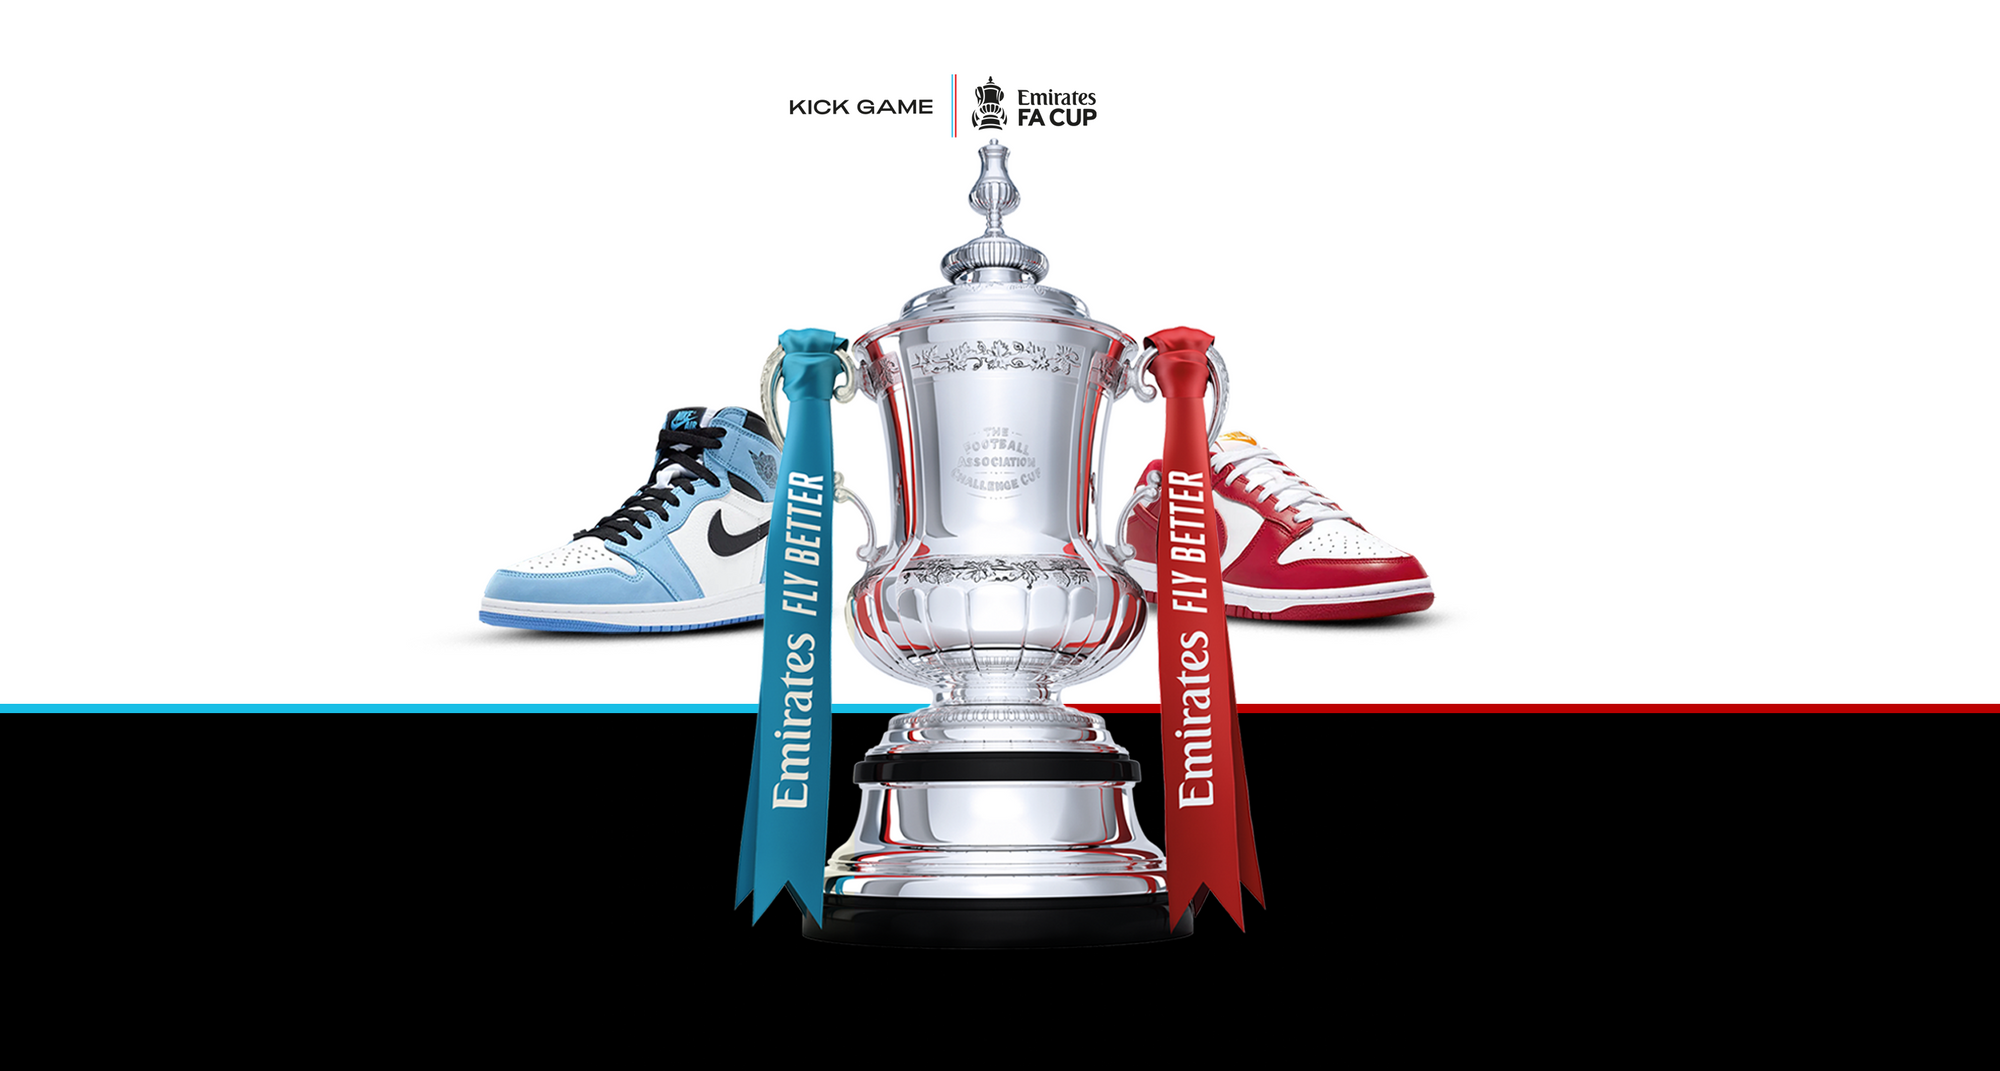 UrlfreezeShops Partnered With Emirates Fa Cup and Versus to Mark 2023’s Prestigious Game